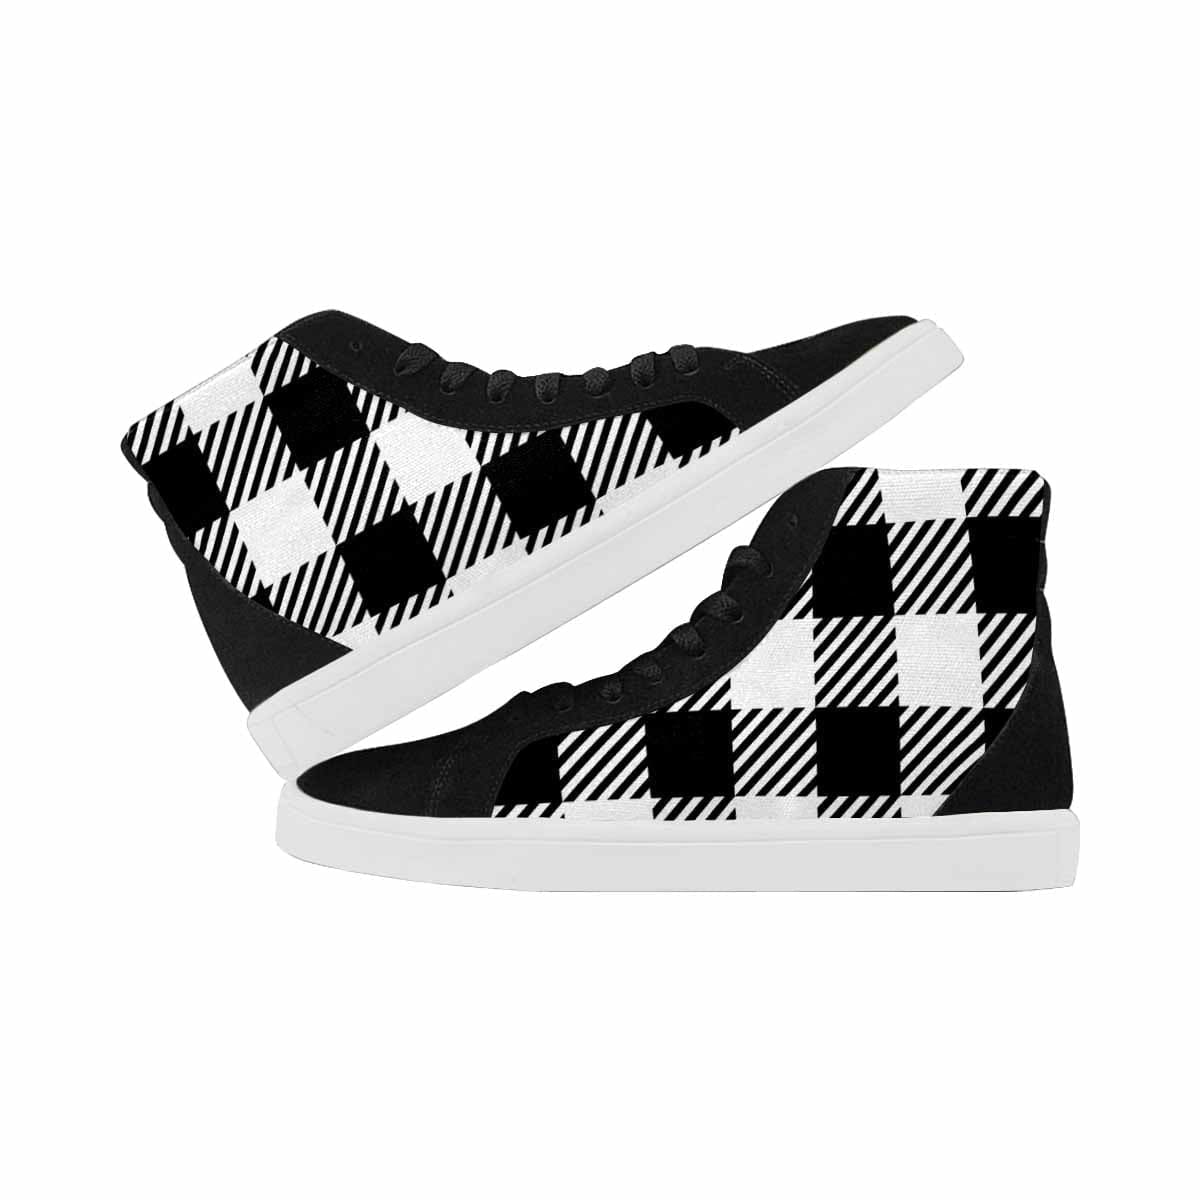 Uniquely You Sneakers for Women, Buffalo Plaid Black and White - High Top Sports Shoes - Scarvesnthangs